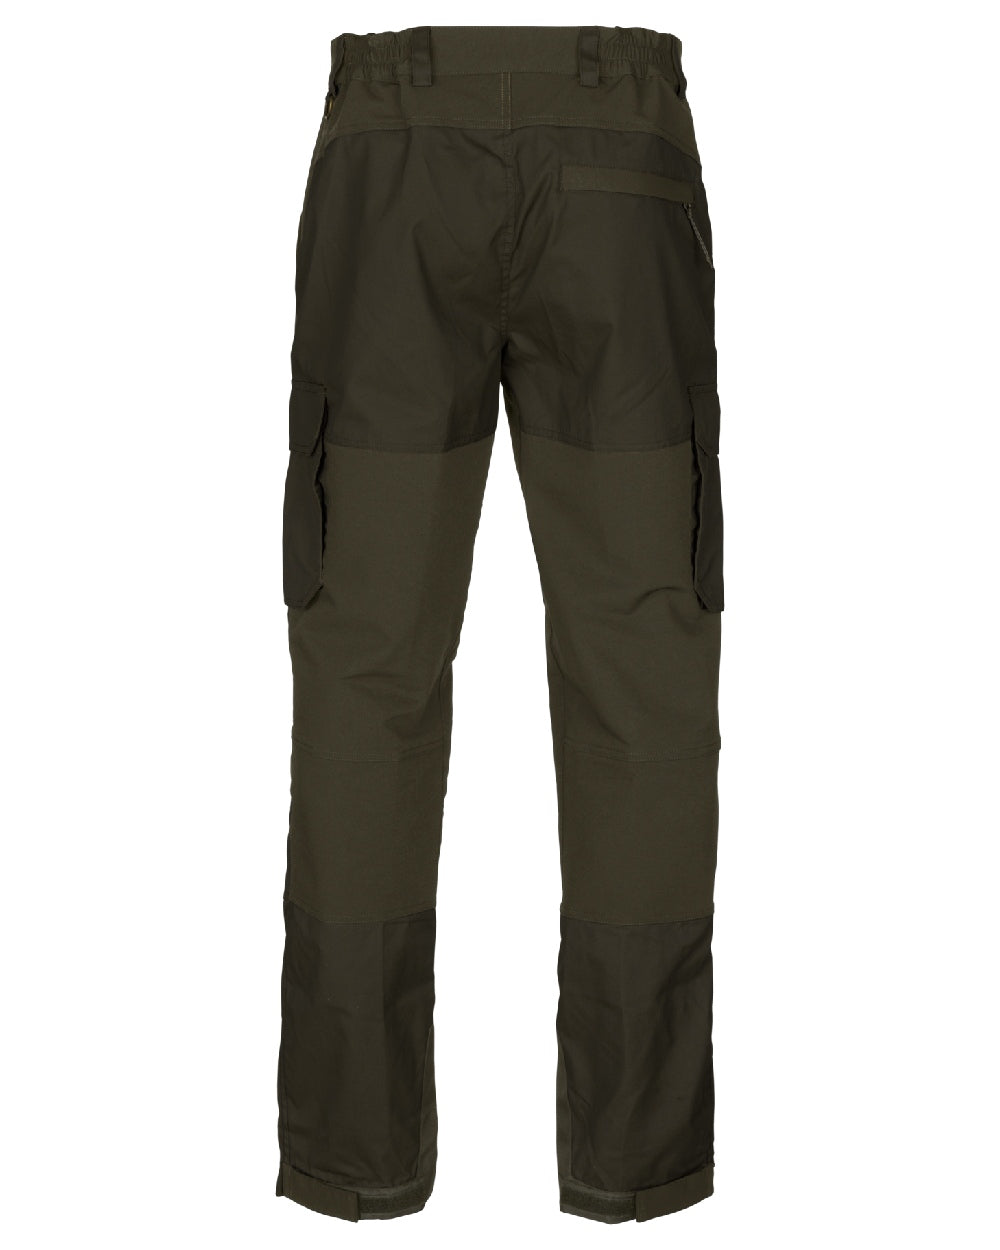 Light Pine/Grizzly Brown coloured Seeland Elm Trousers on white background 